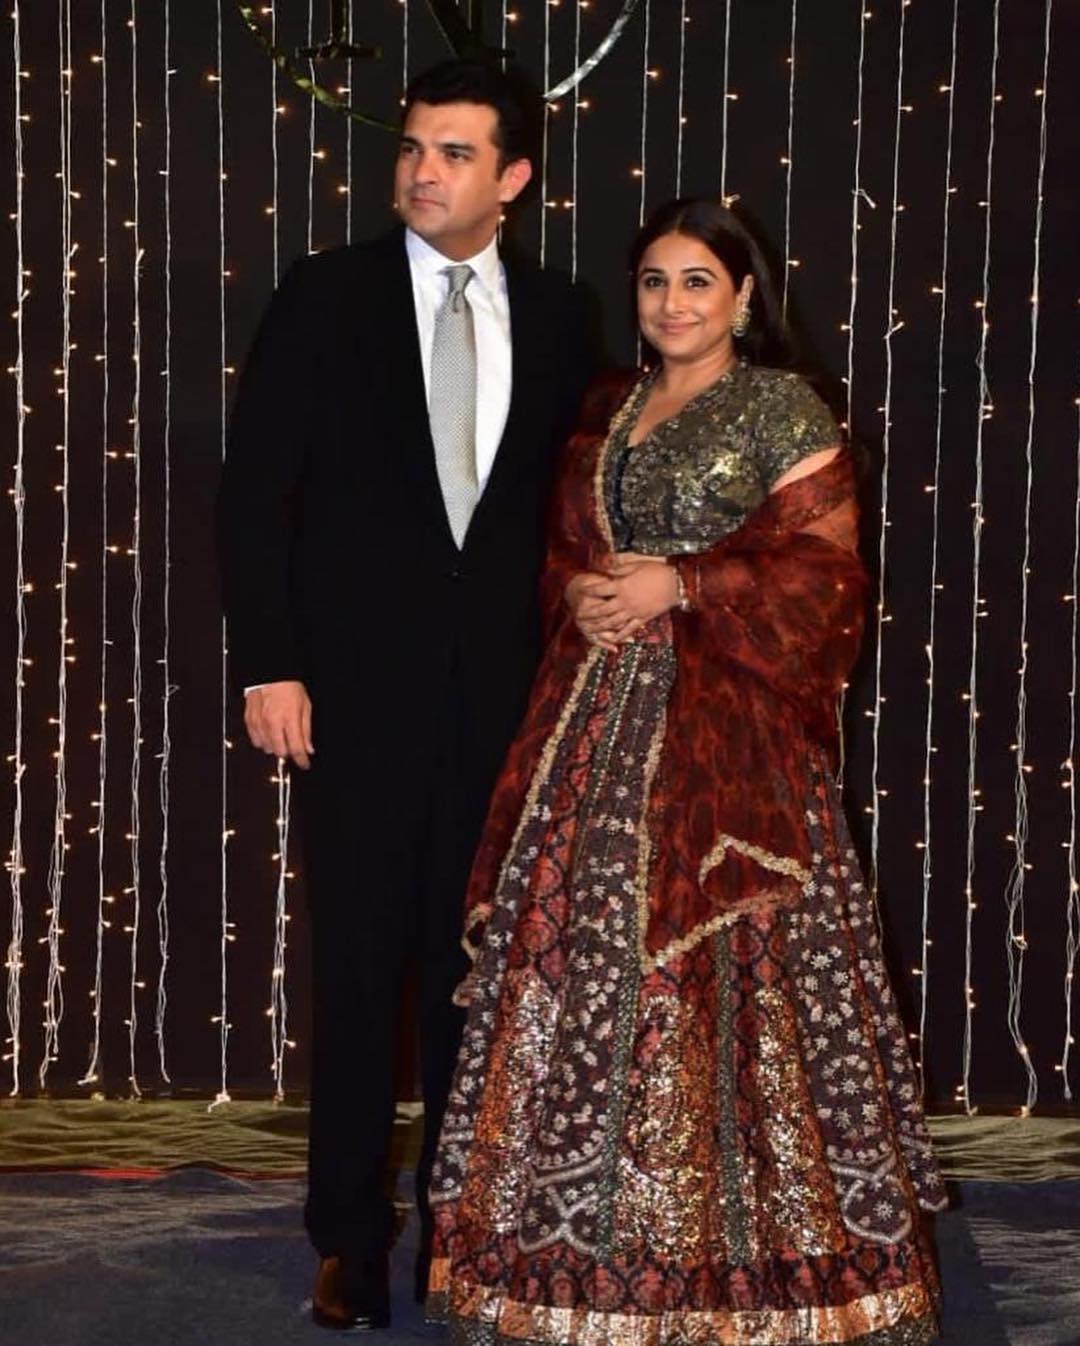 Wedding Reception Of Priyanka And Nick Continues, The Couple Hosts A Party For All The Bollywood Stars